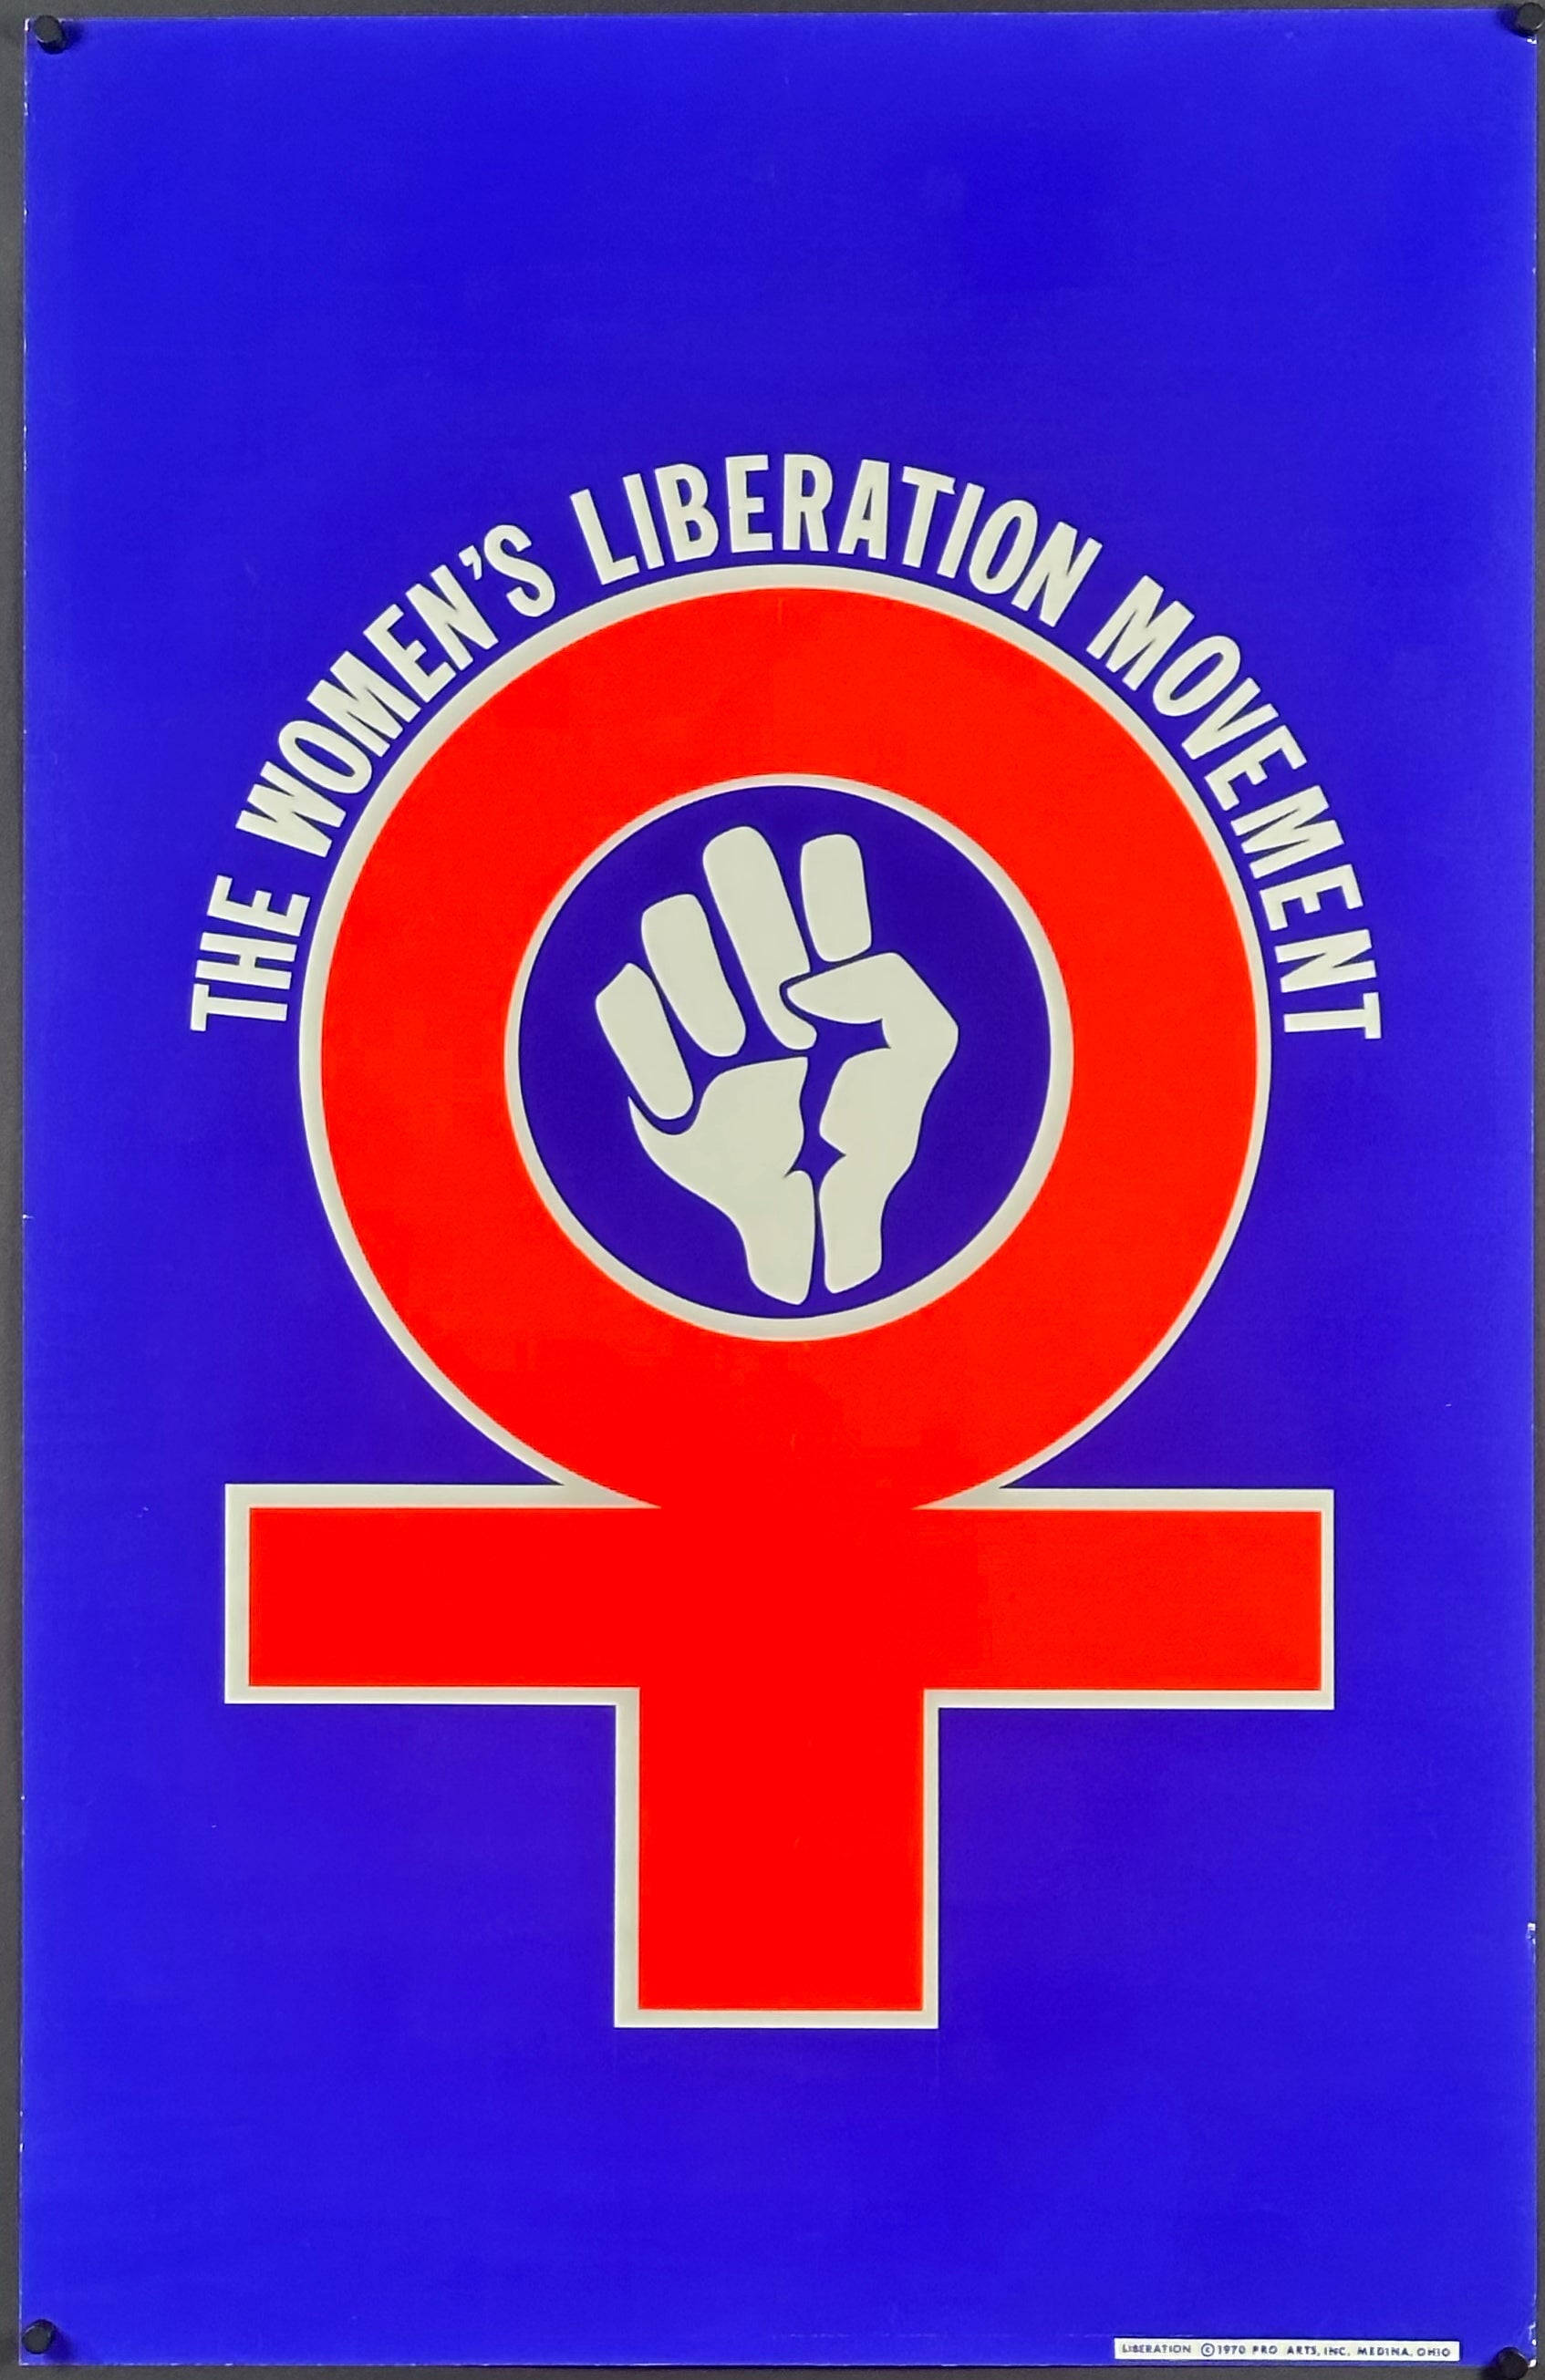 "Women's Liberation Movement" Political Poster (1970) - posterpalace.com